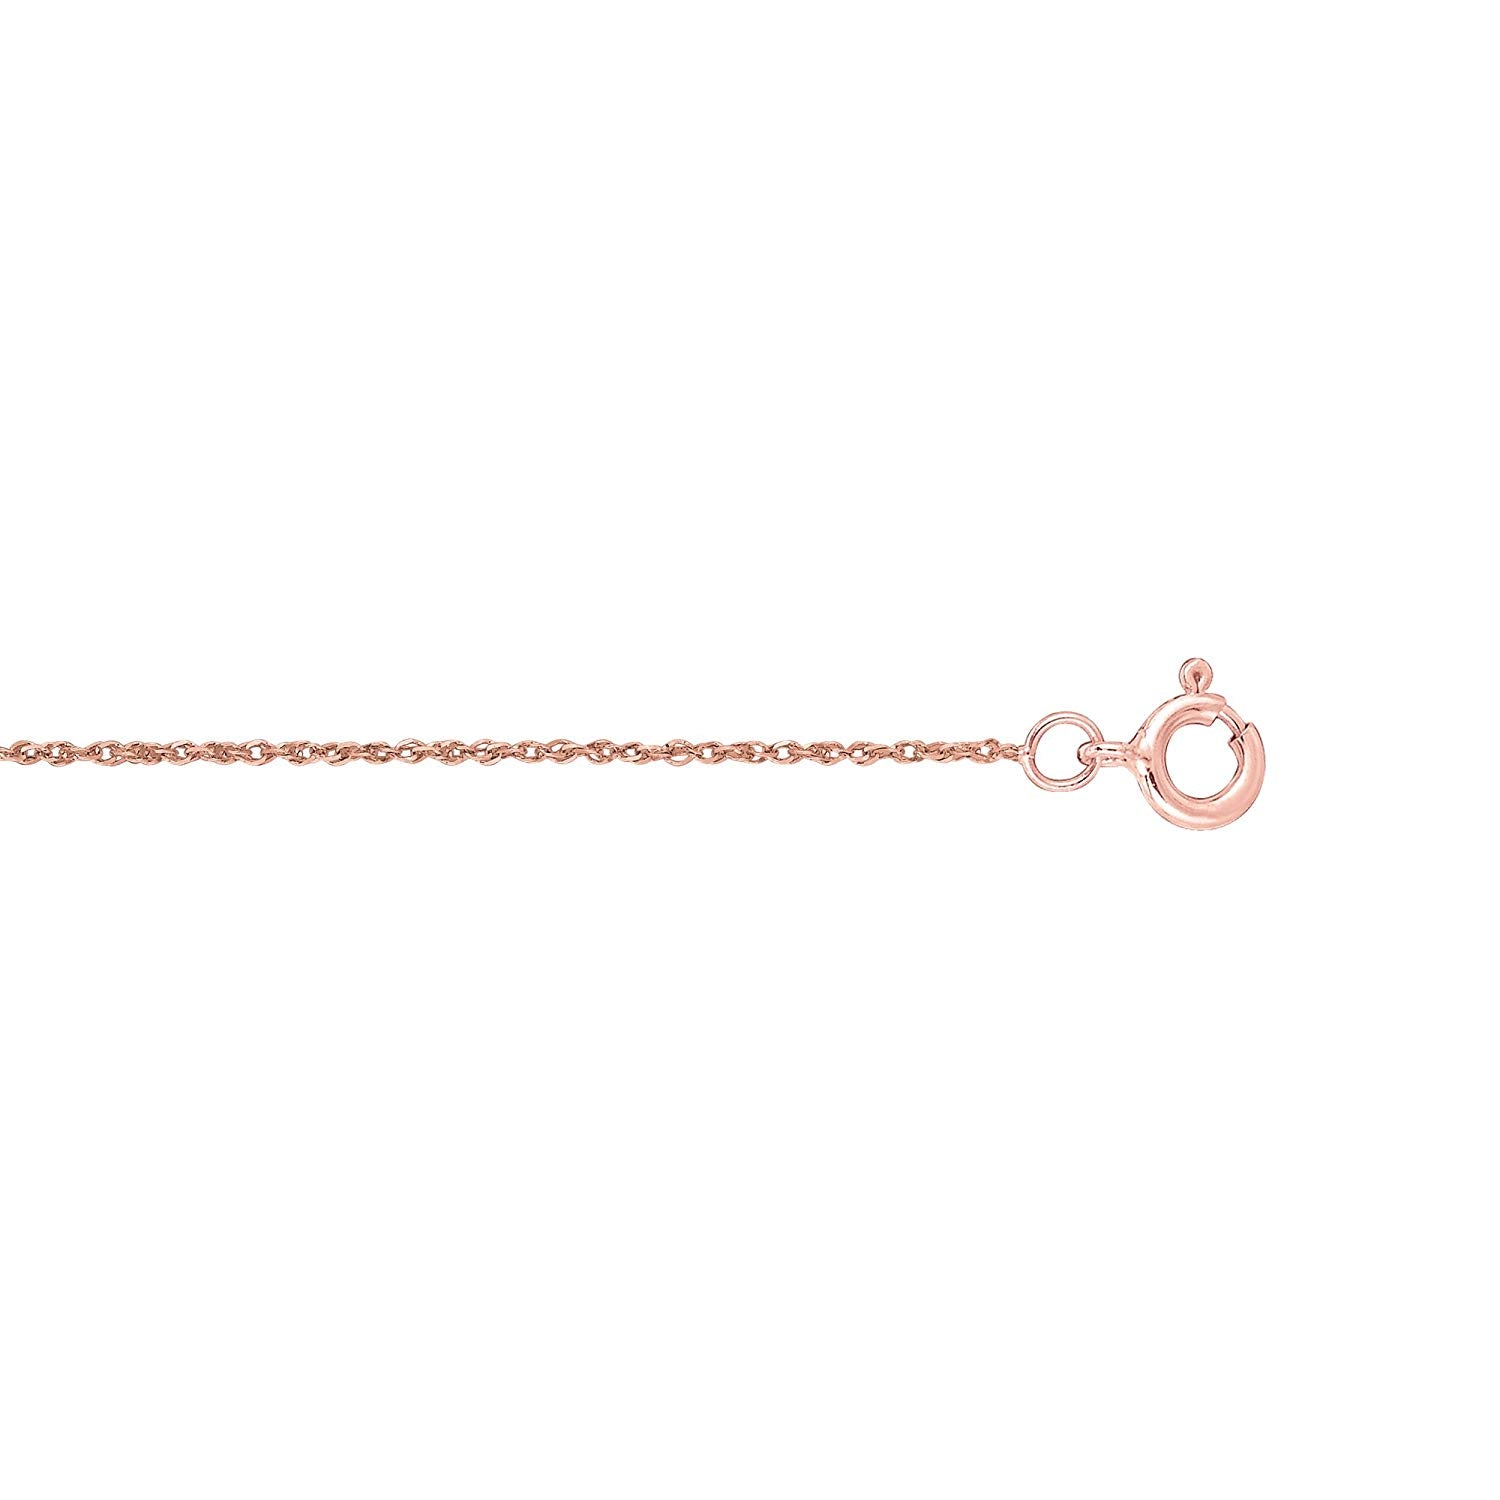 14k Rose Gold Rope Chain Necklace, 0.5mm